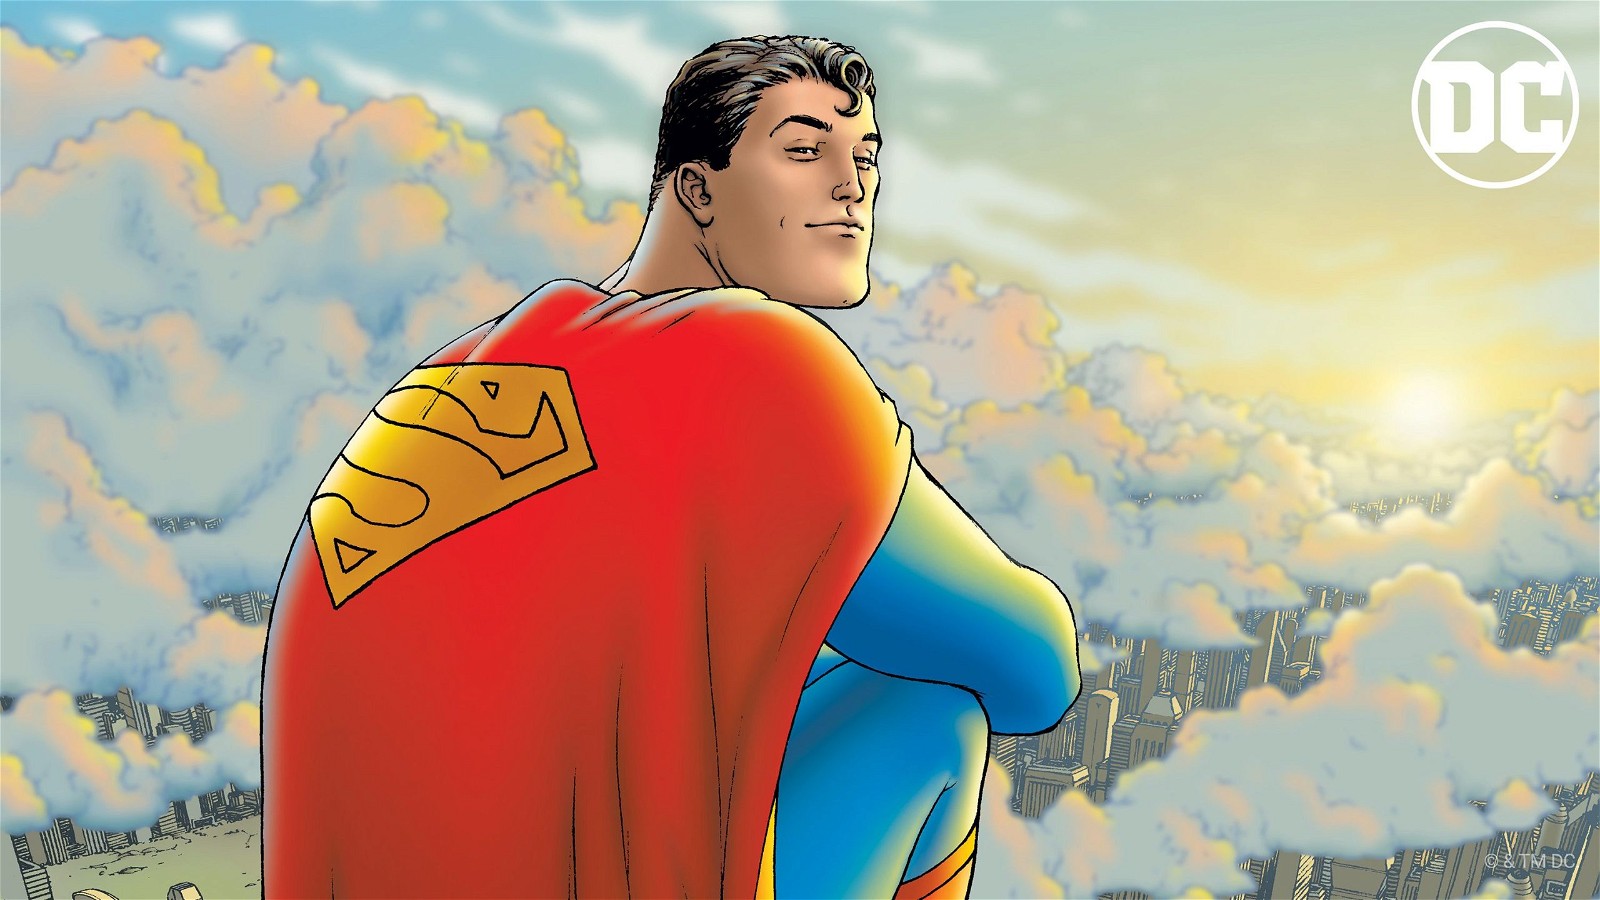 Concept art for Superman that James Gunn unveiled last year